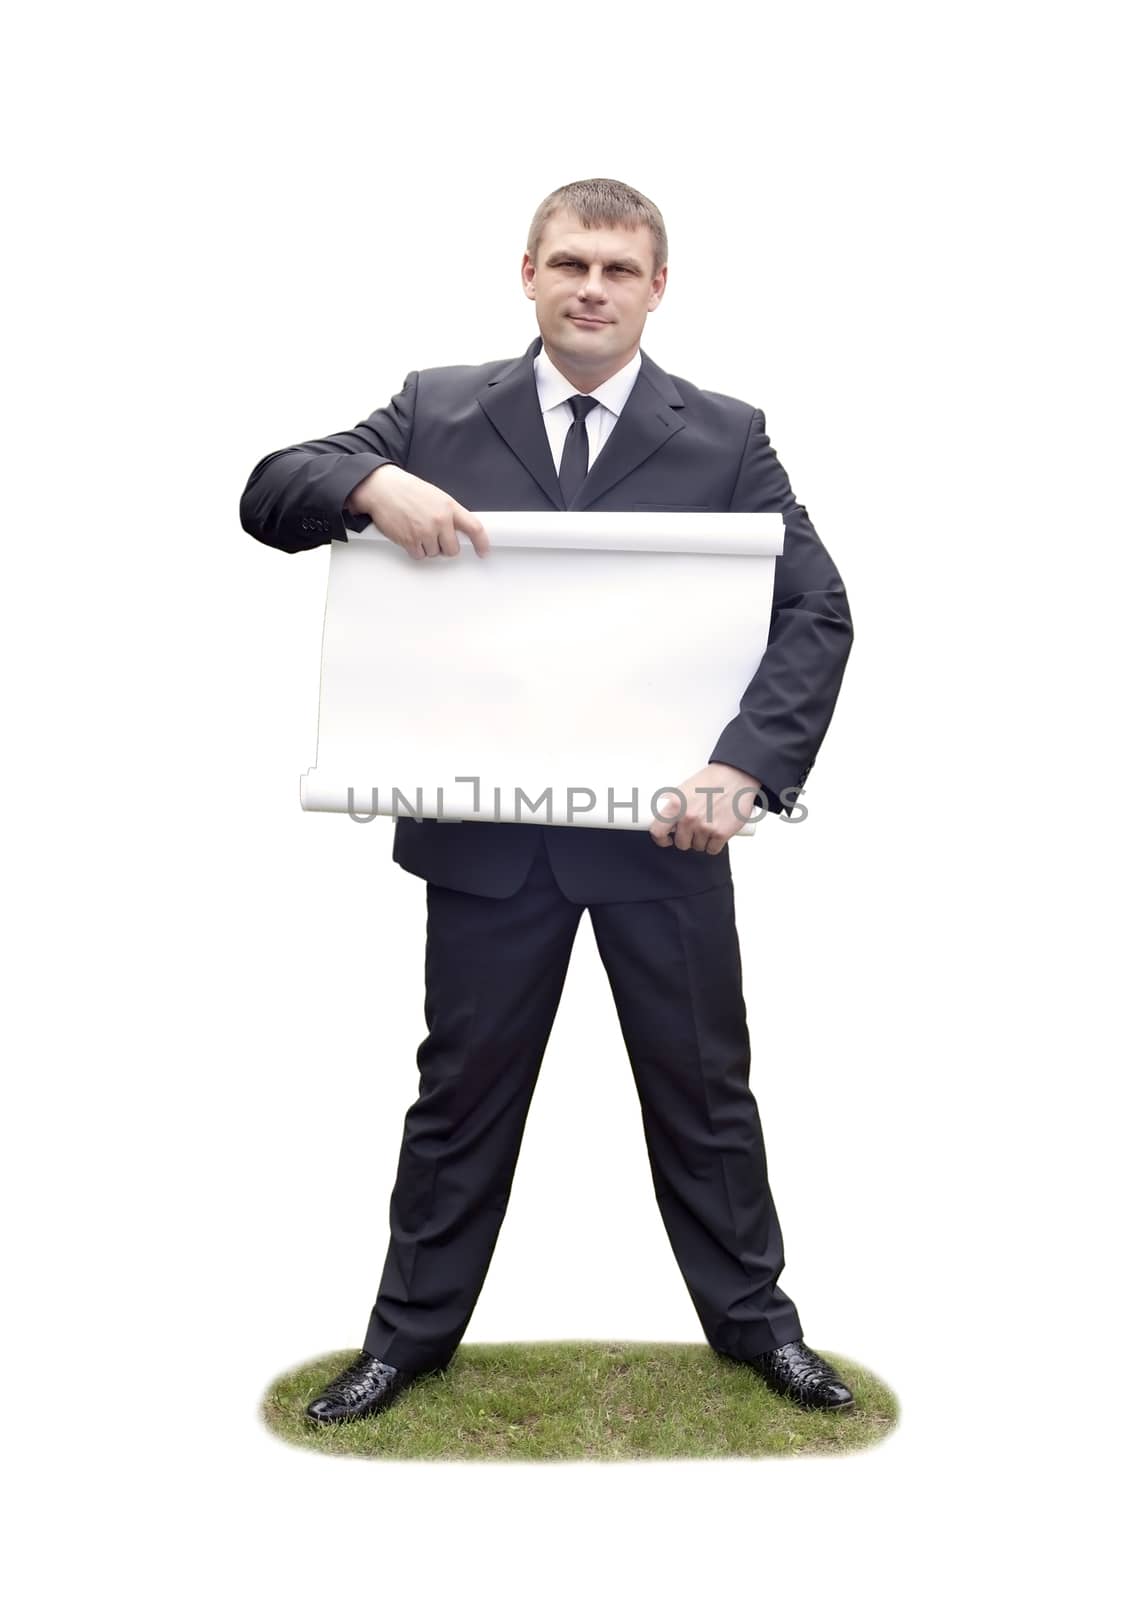 A man in a dark suit holding a sheet of ads and standing on the grass